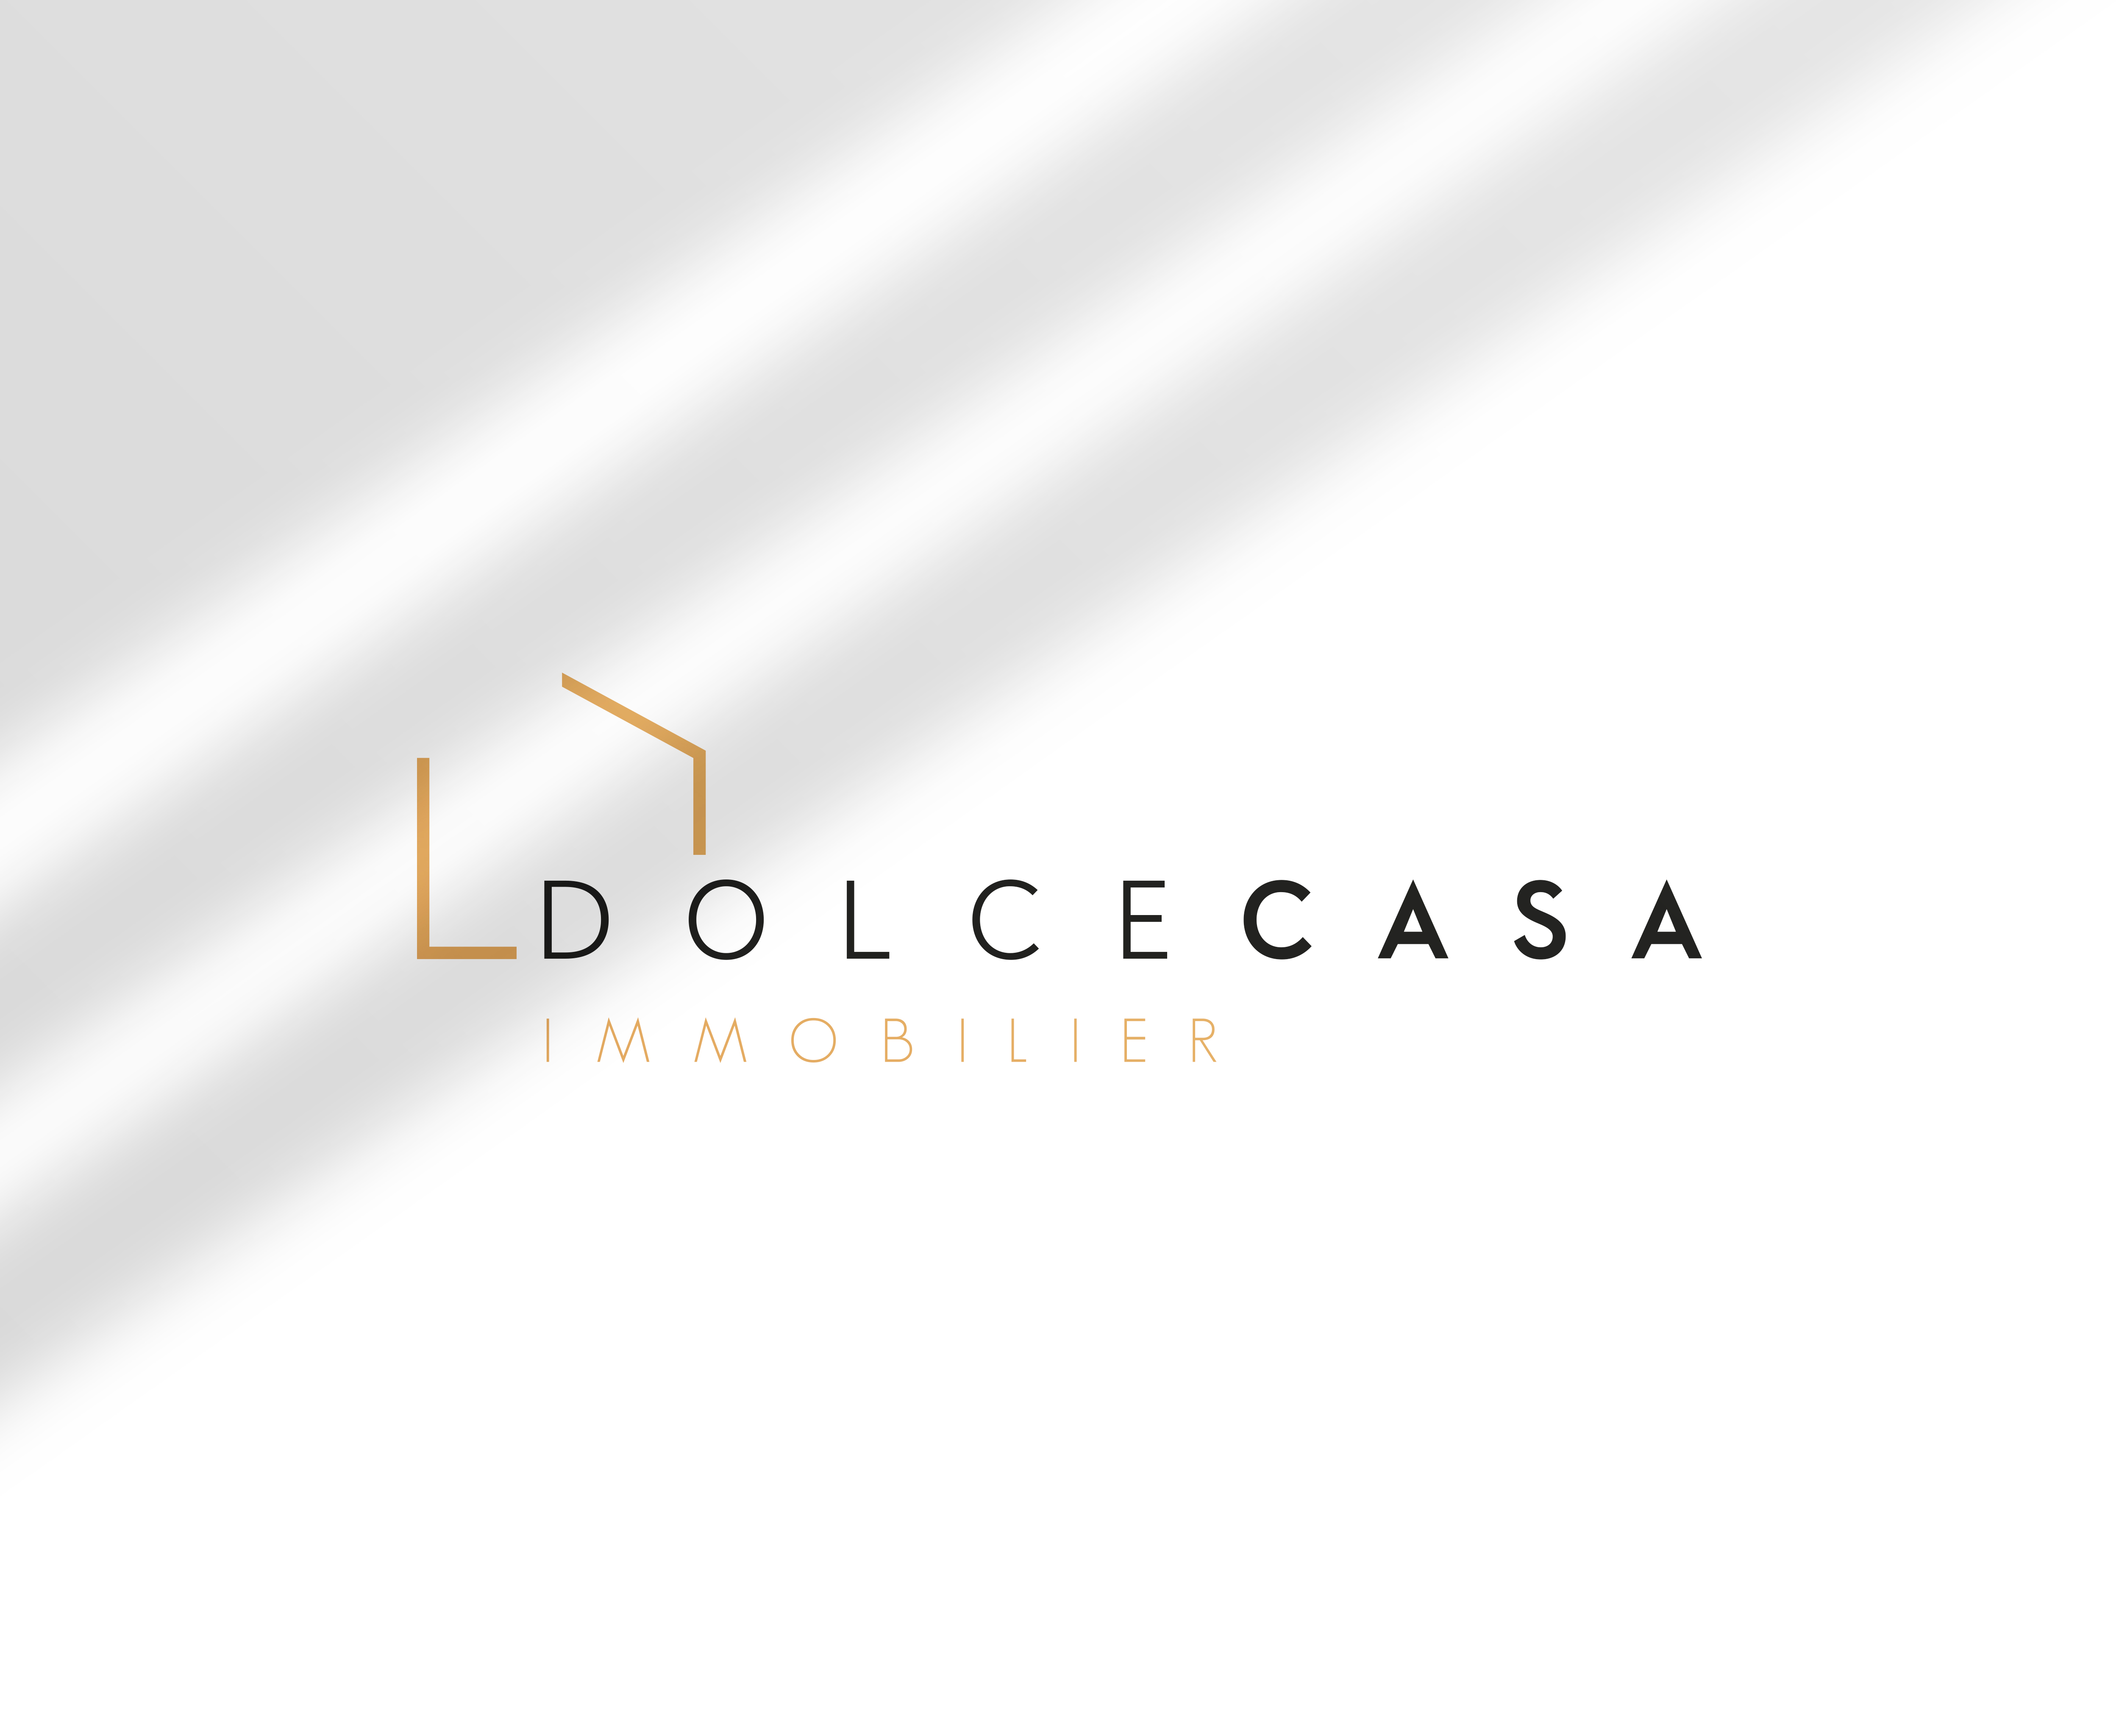 DOLCE CASA IMMOBILIER 4